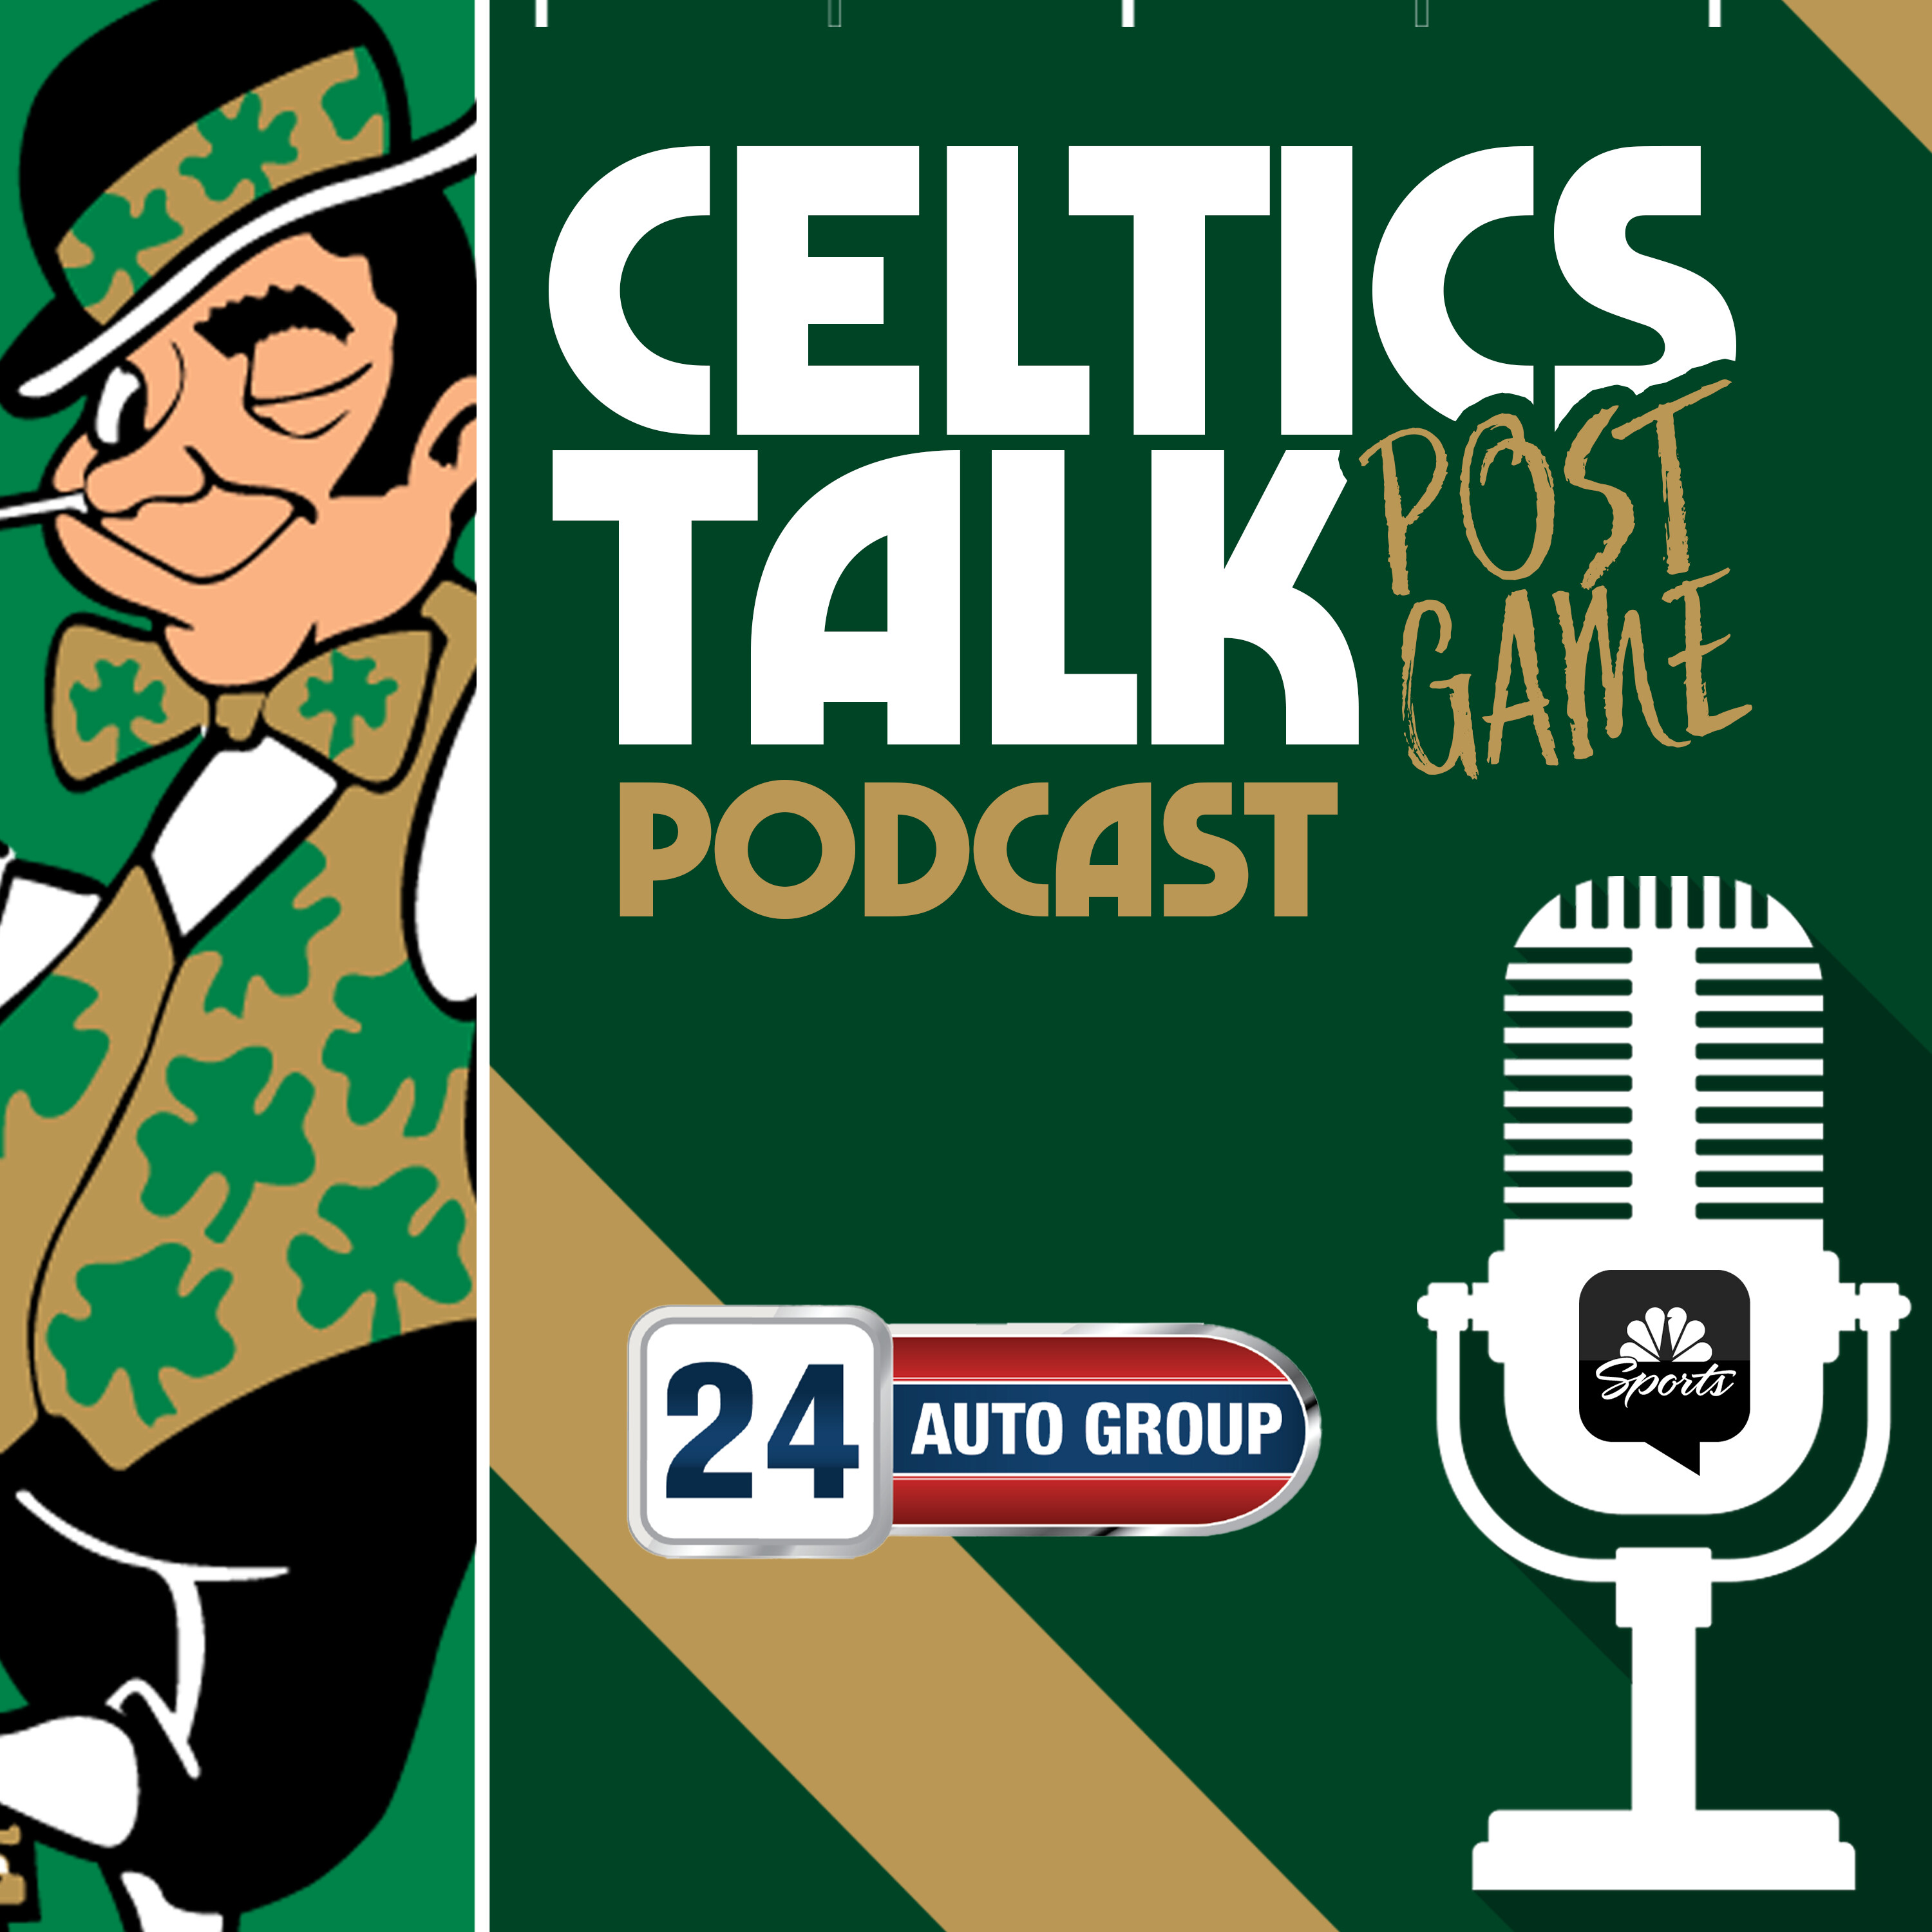 POSTGAME POD: C’s take care of business at home, clinch playoff spot with blowout win vs. Suns